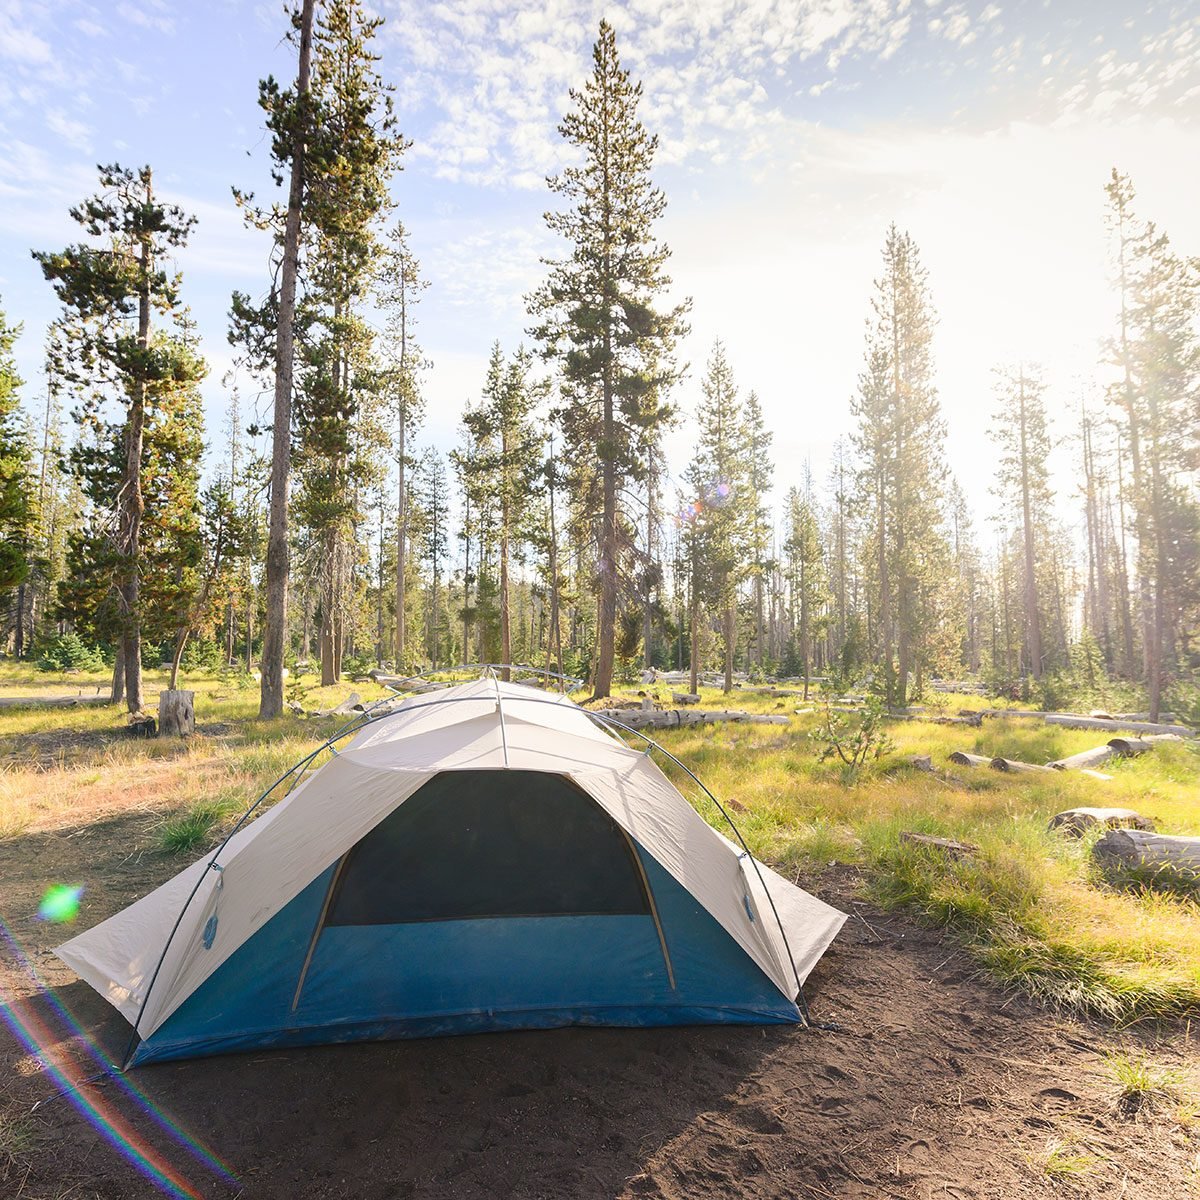 https://www.familyhandyman.com/wp-content/uploads/2023/08/How-Hot-Is-Too-Hot-for-Camping_GettyImages-1175092211_FT.jpg?fit=700%2C1024